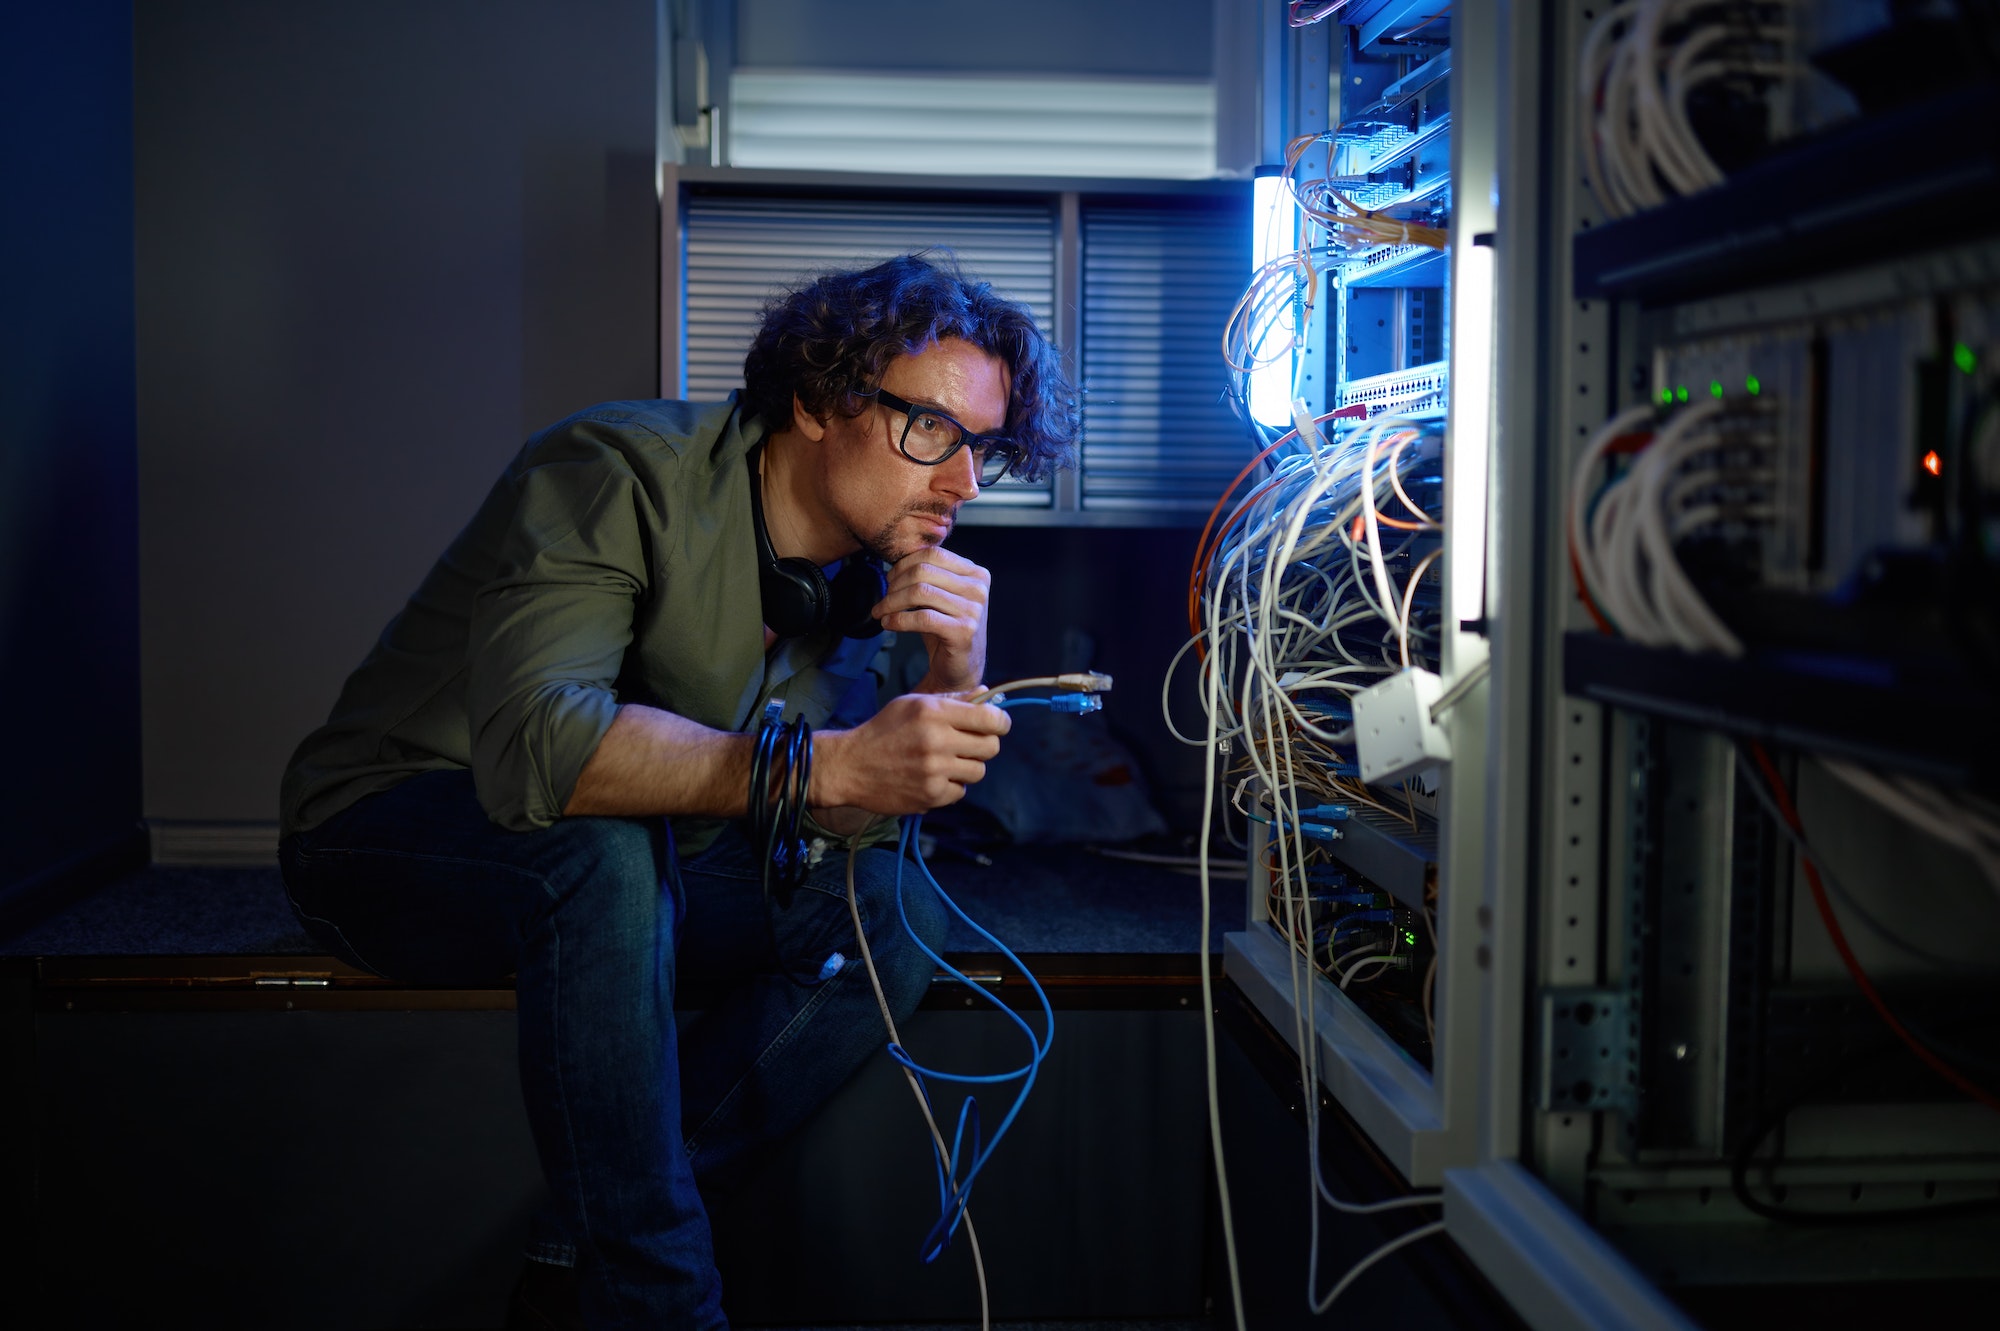 Male network engineer connecting cables in server room